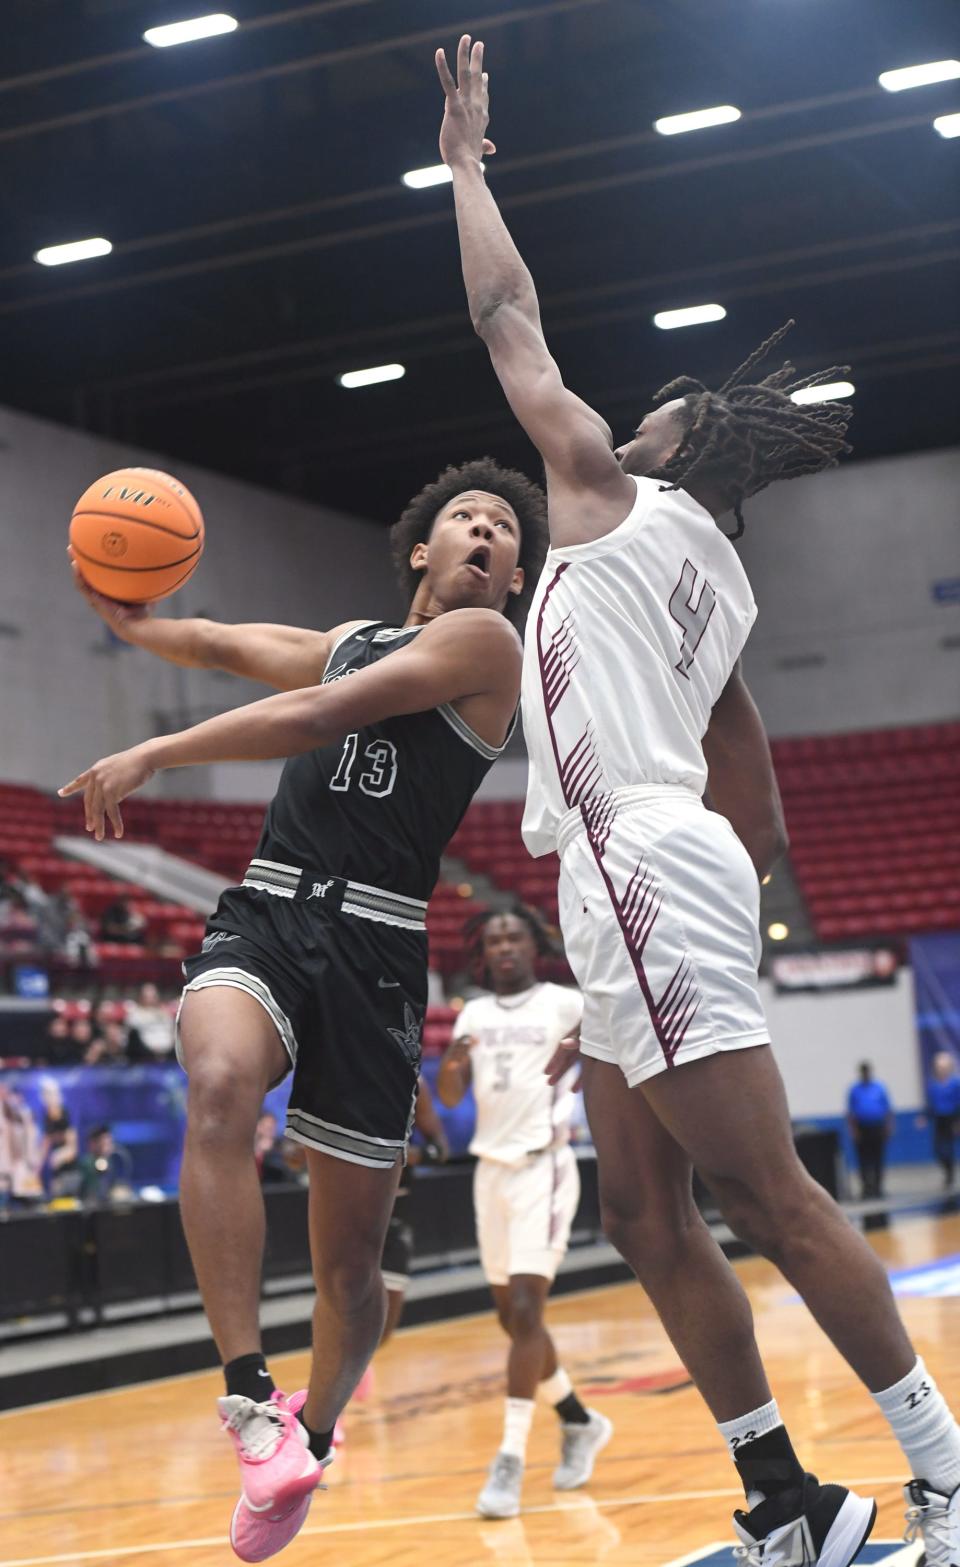 Mariner's Marcus Kelley, Jr. (13) shoots against Norland's Marcus Allen (4) in the Class 5A semifinal during the Florida High School State Championships at the RP Funding Center in Lakeland on Wednesday, March 6, 2024. Norland defeated Mariner 53-37.